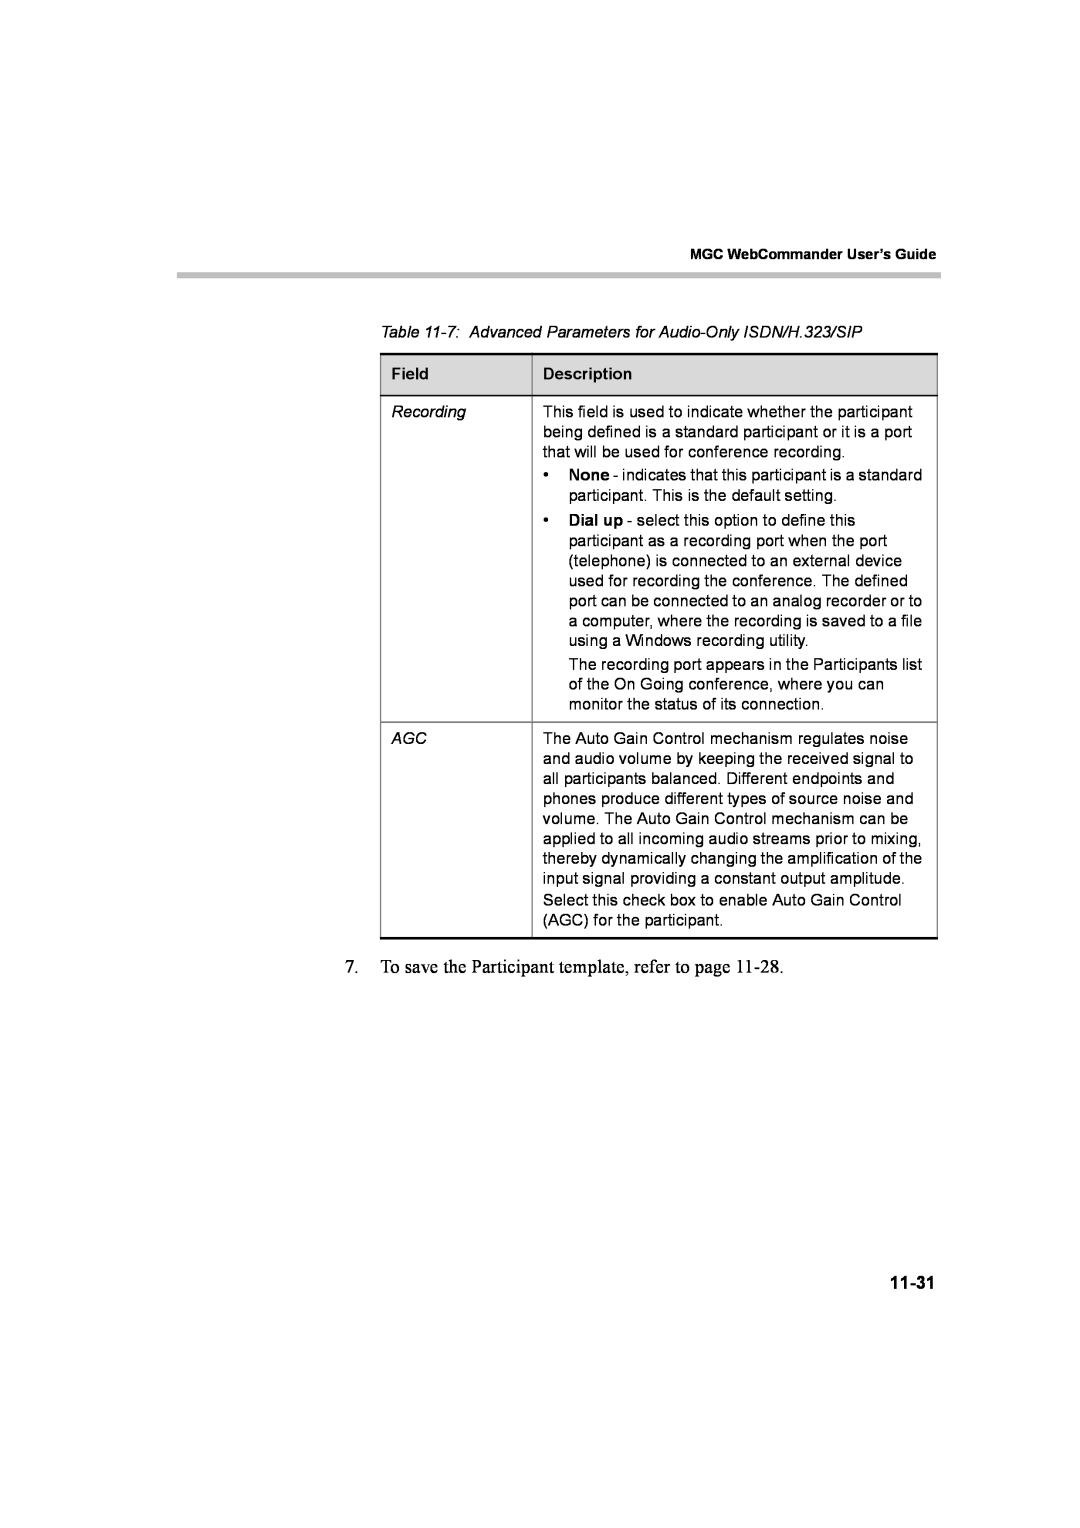 Polycom 8 manual To save the Participant template, refer to page, 11-31, Field, Description 